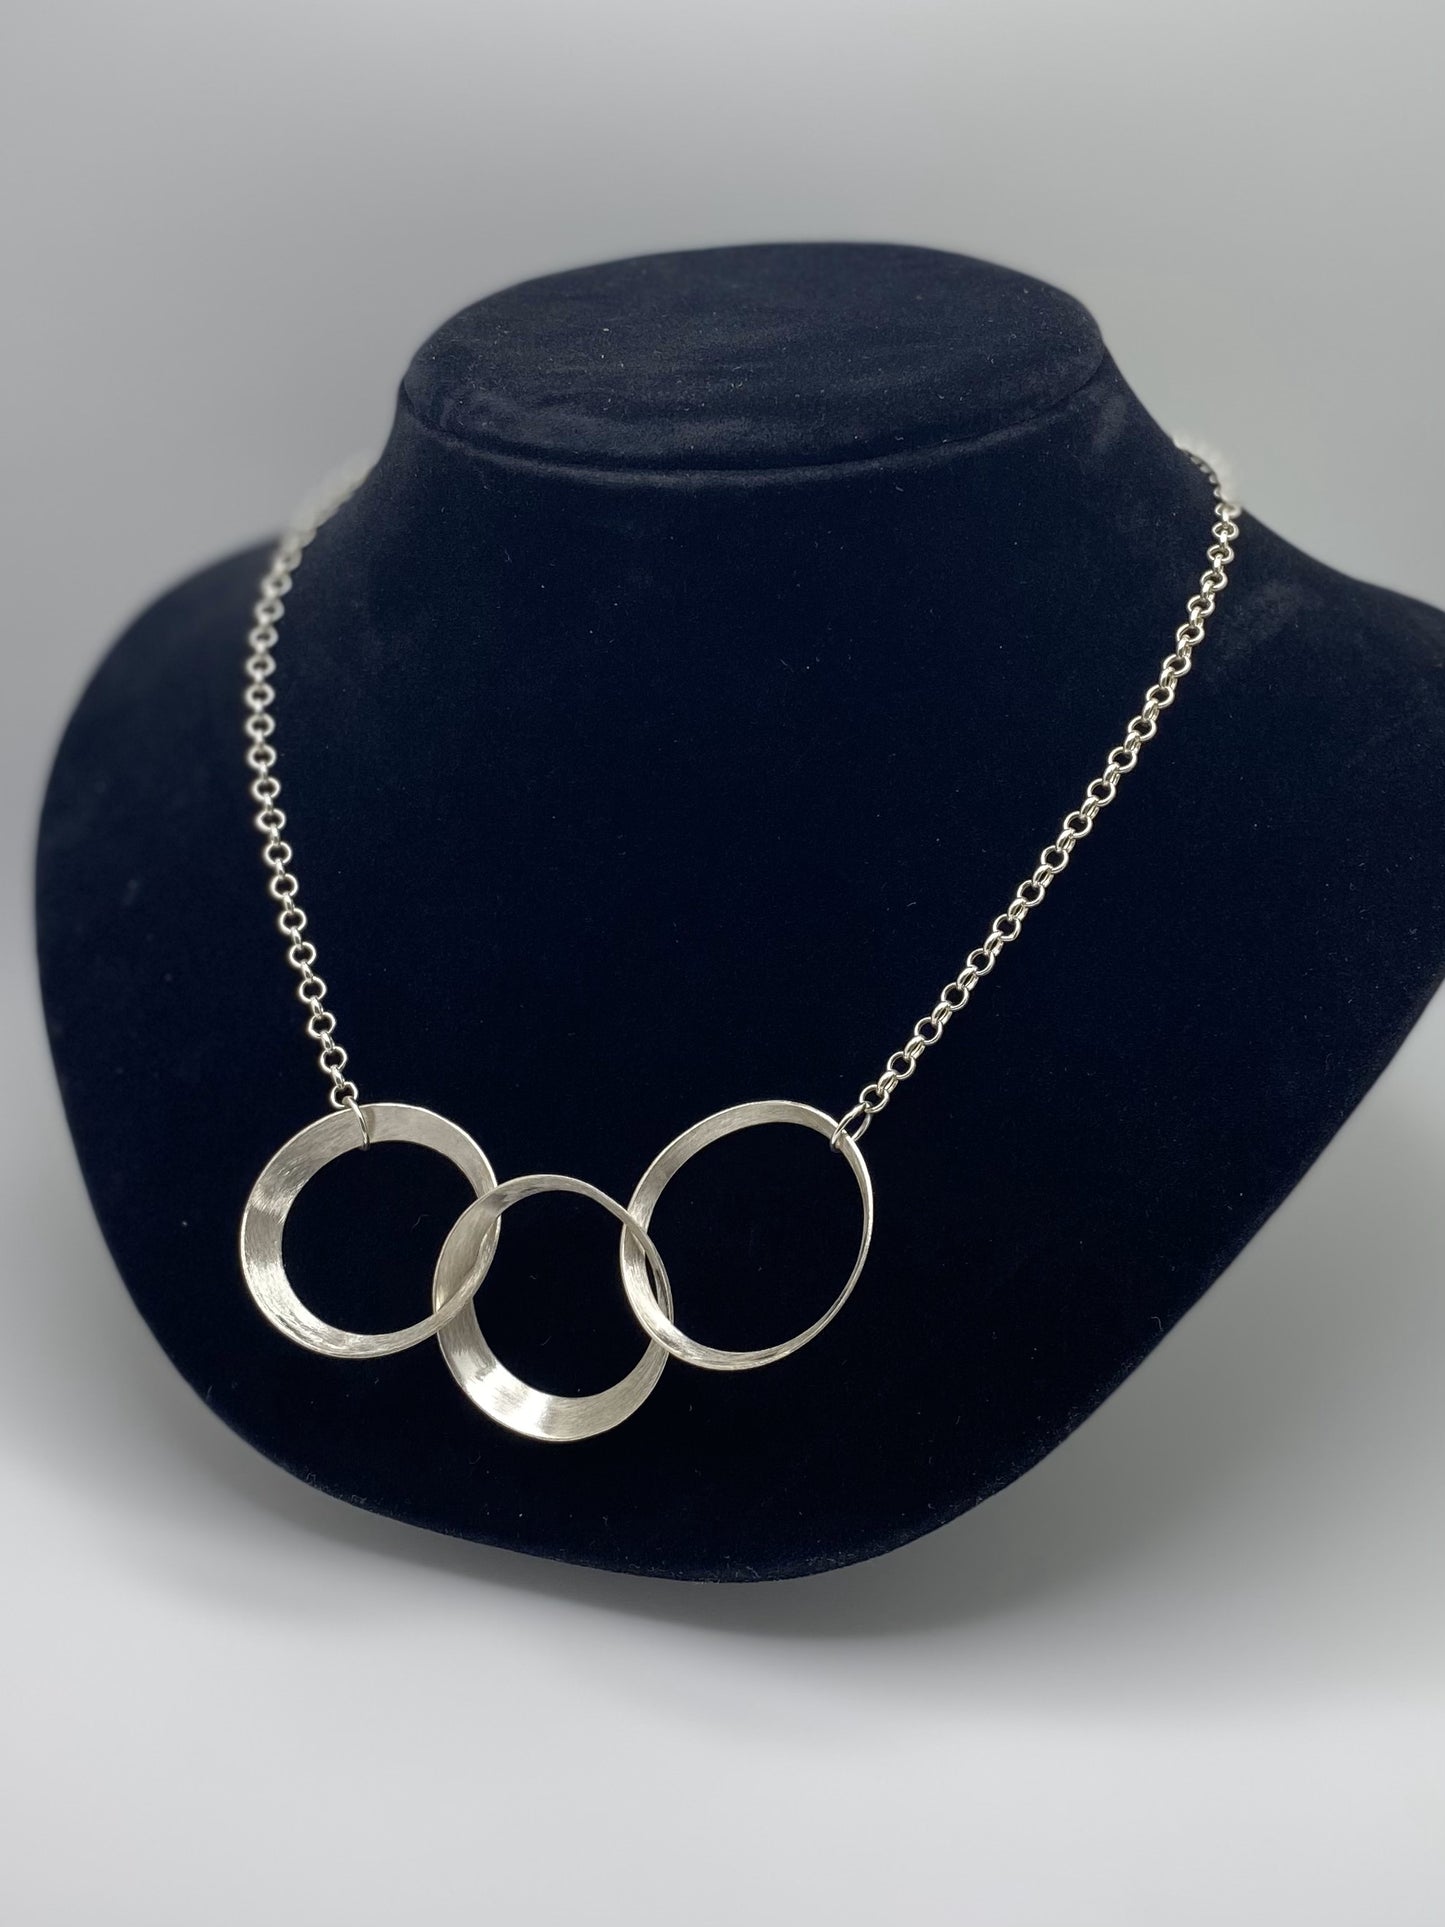 Three Circles Handmade Necklace Sterling Silver with Sterling Chain